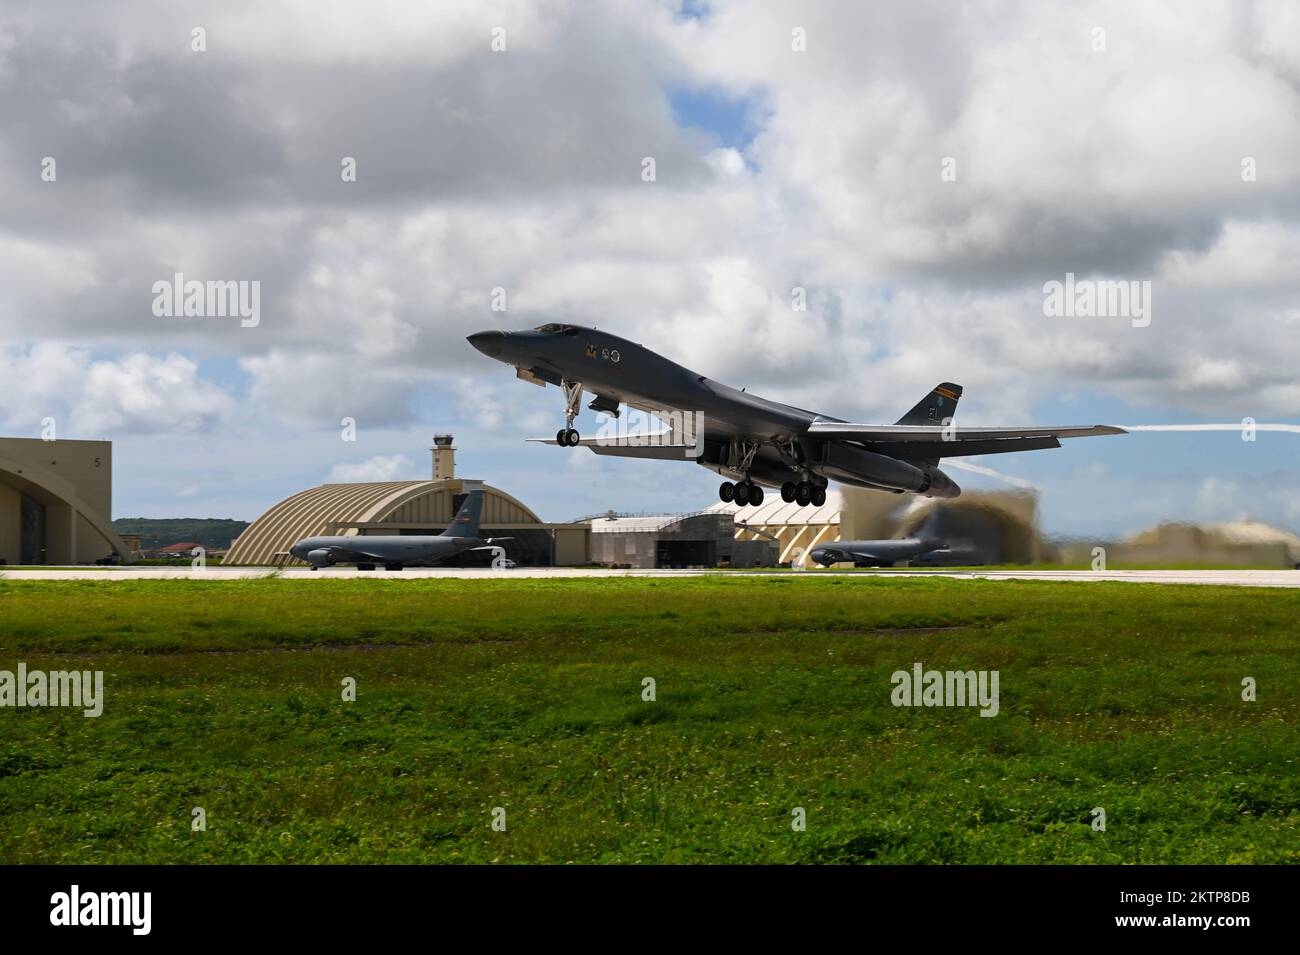 A U.S. Air Force B-1B Lancer assigned to the 37th Expeditionary Bomb Squadron, Ellsworth Air Force Base, South Dakota, takes off in support of a Bomber Task Force mission at Andersen AFB, Guam, Nov. 14, 2022.The U.S. Indo-Pacific Command’s force employment, military posture, and operations honor security commitments in the region by enabling rapid response  to any potential crisis or challenge in the Indo-Pacific. (U.S. Air Force photo by Airman 1st Class Allison Martin) Stock Photo